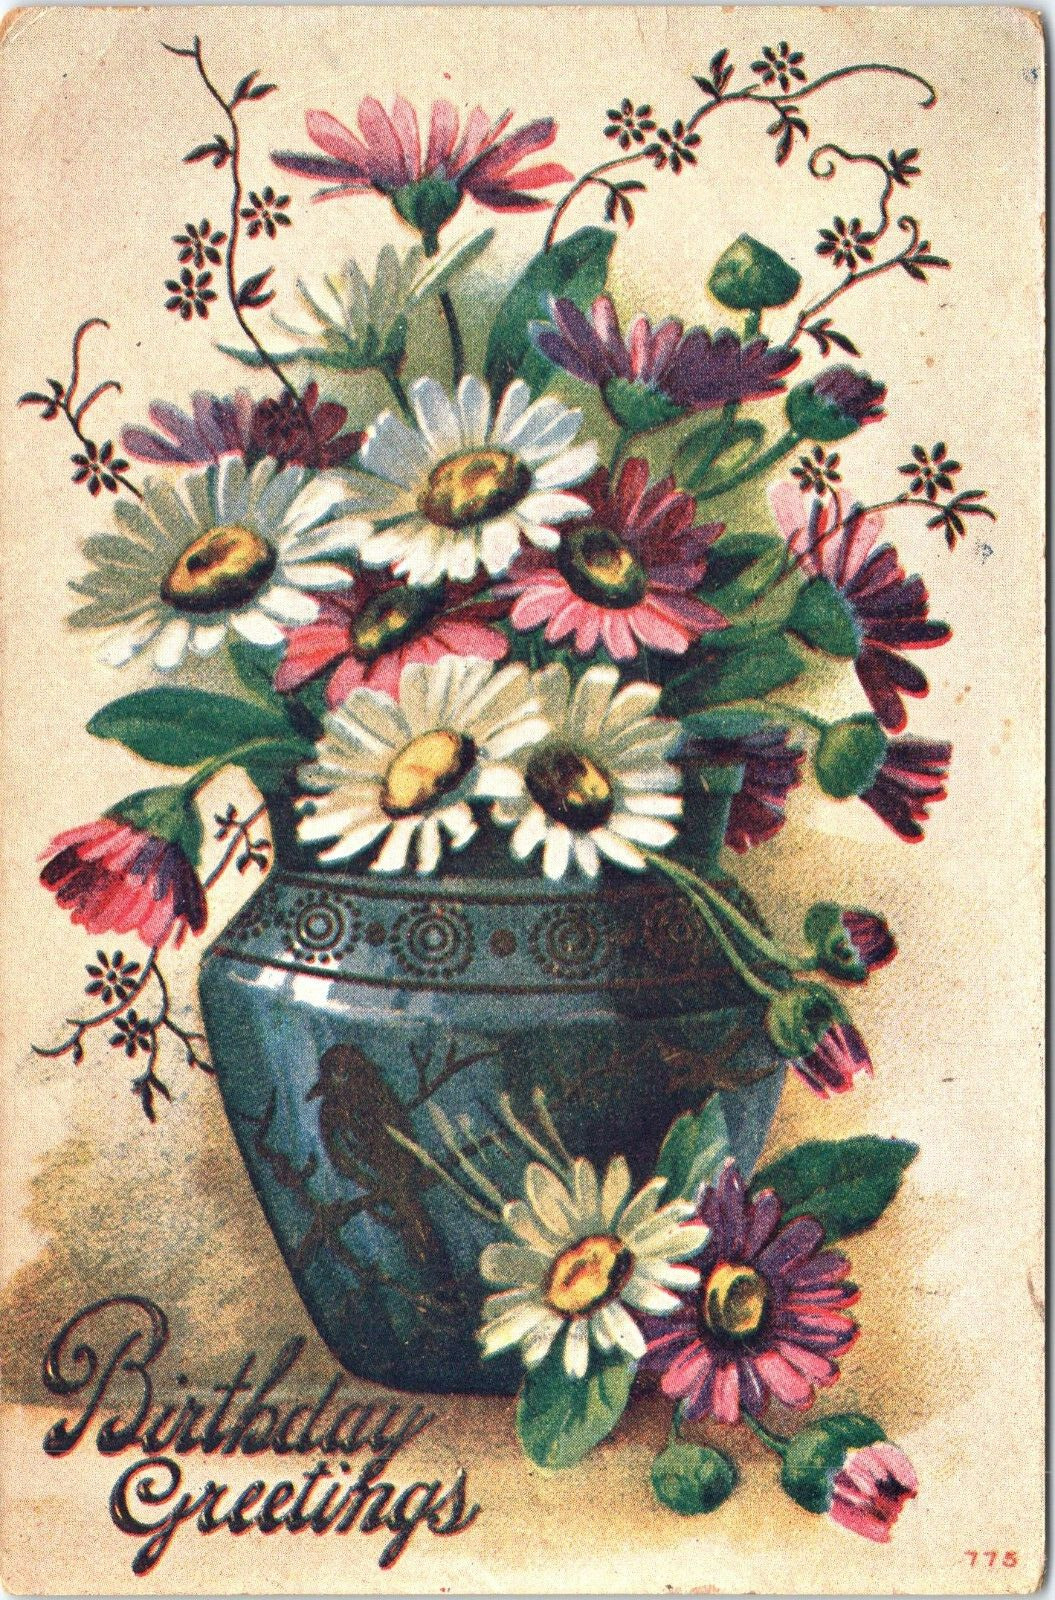 Birthday Greetings Postcard with Pretty Flowers in a Vase with a Bird